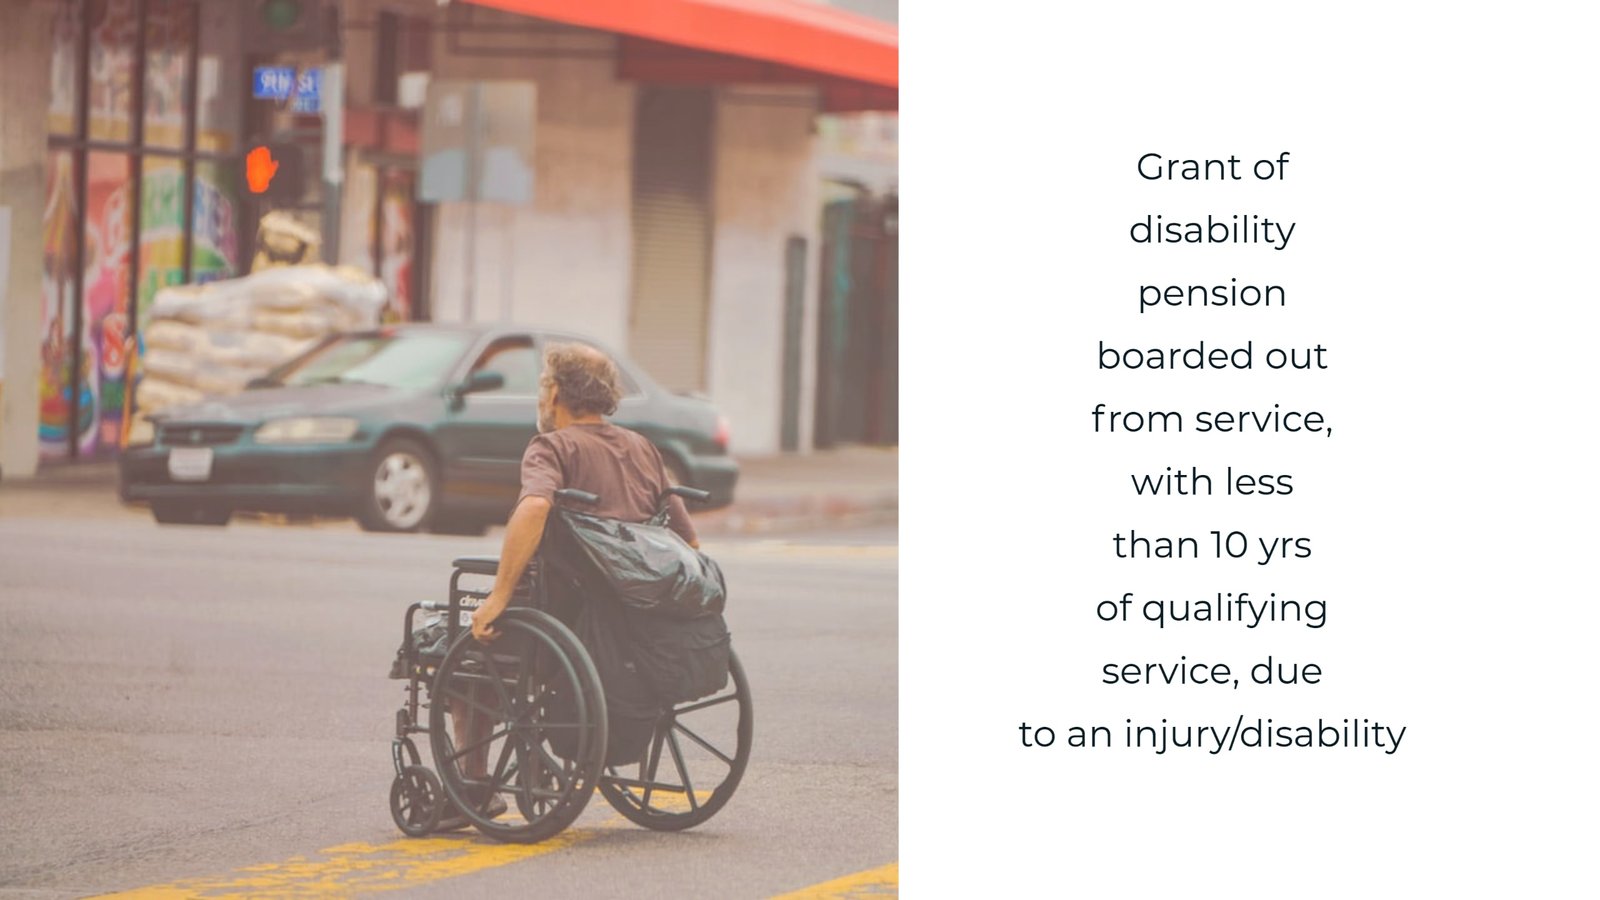 Grant of disability pension boarded out from service, with less than 10 yrs of qualifying service, due to an injury/disability